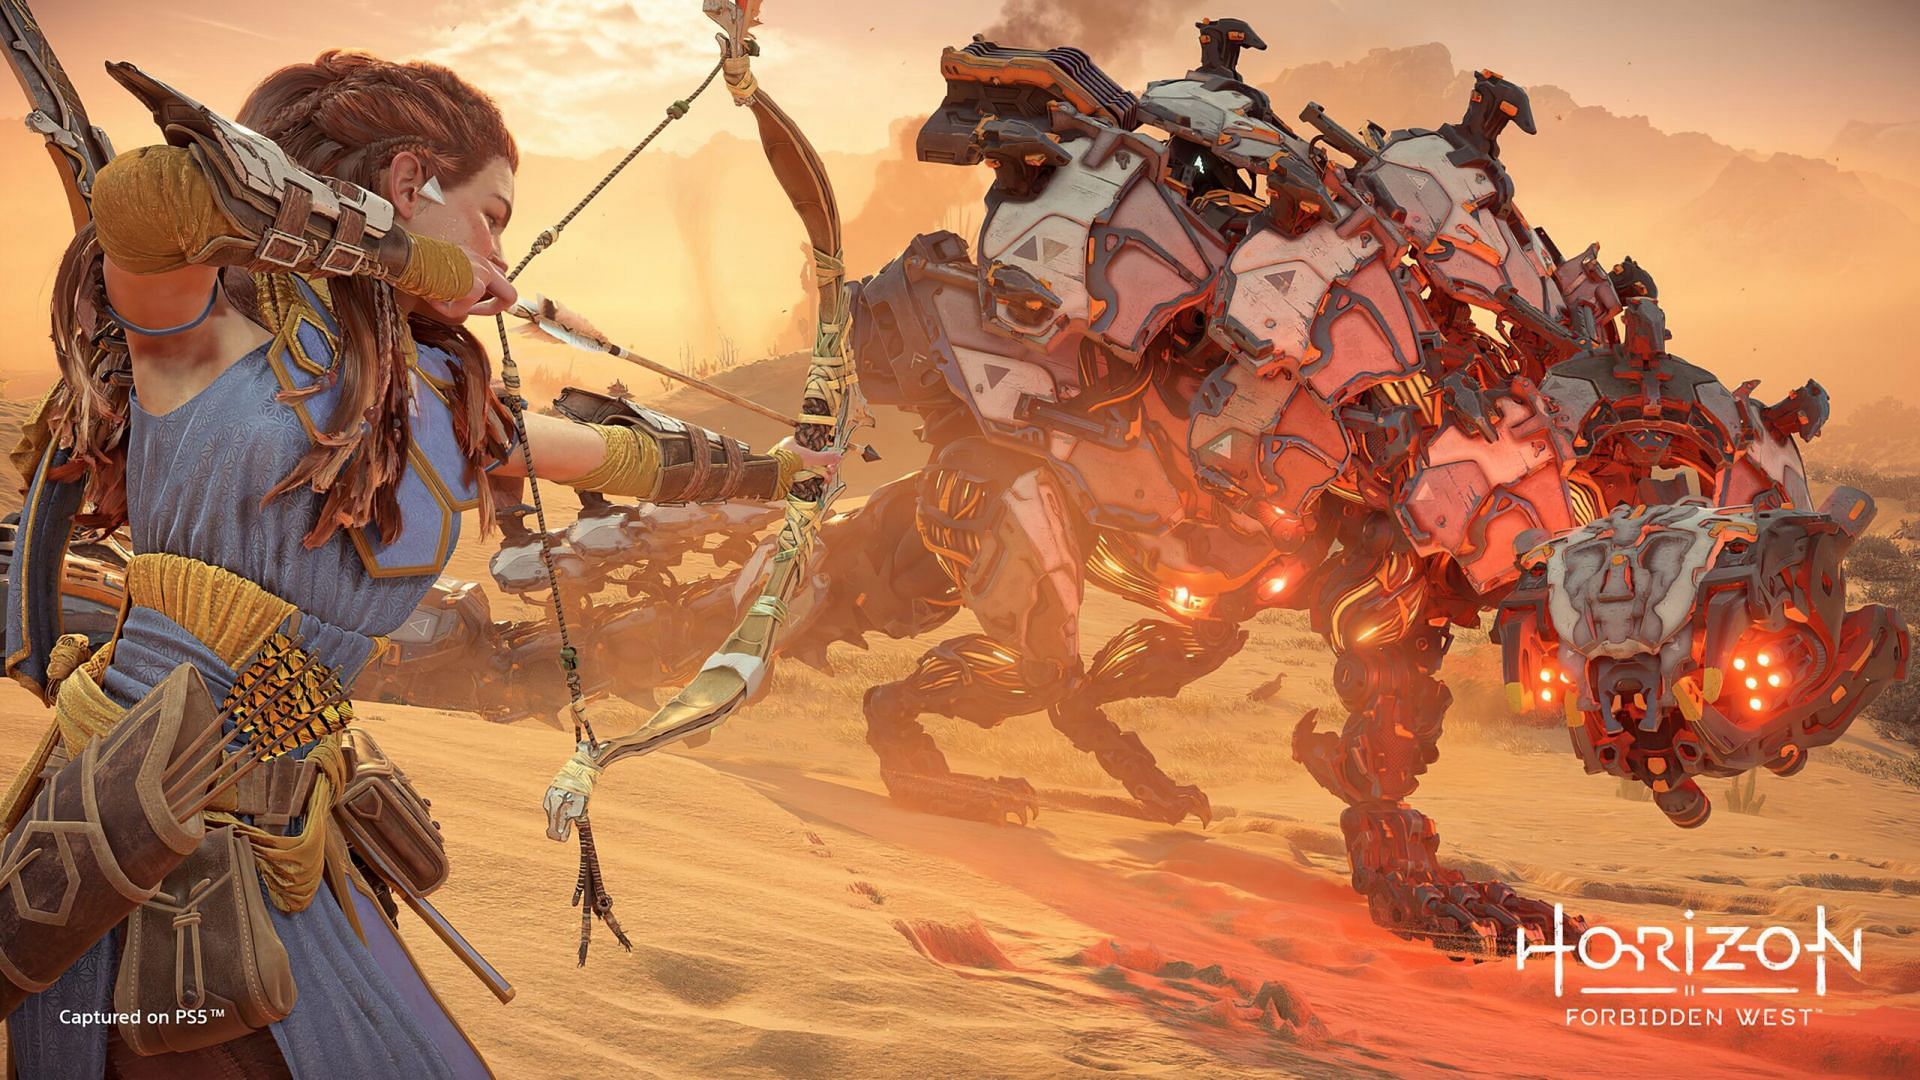 Horizon Forbidden West lets players face off against new and old machines (Image by PlayStation)